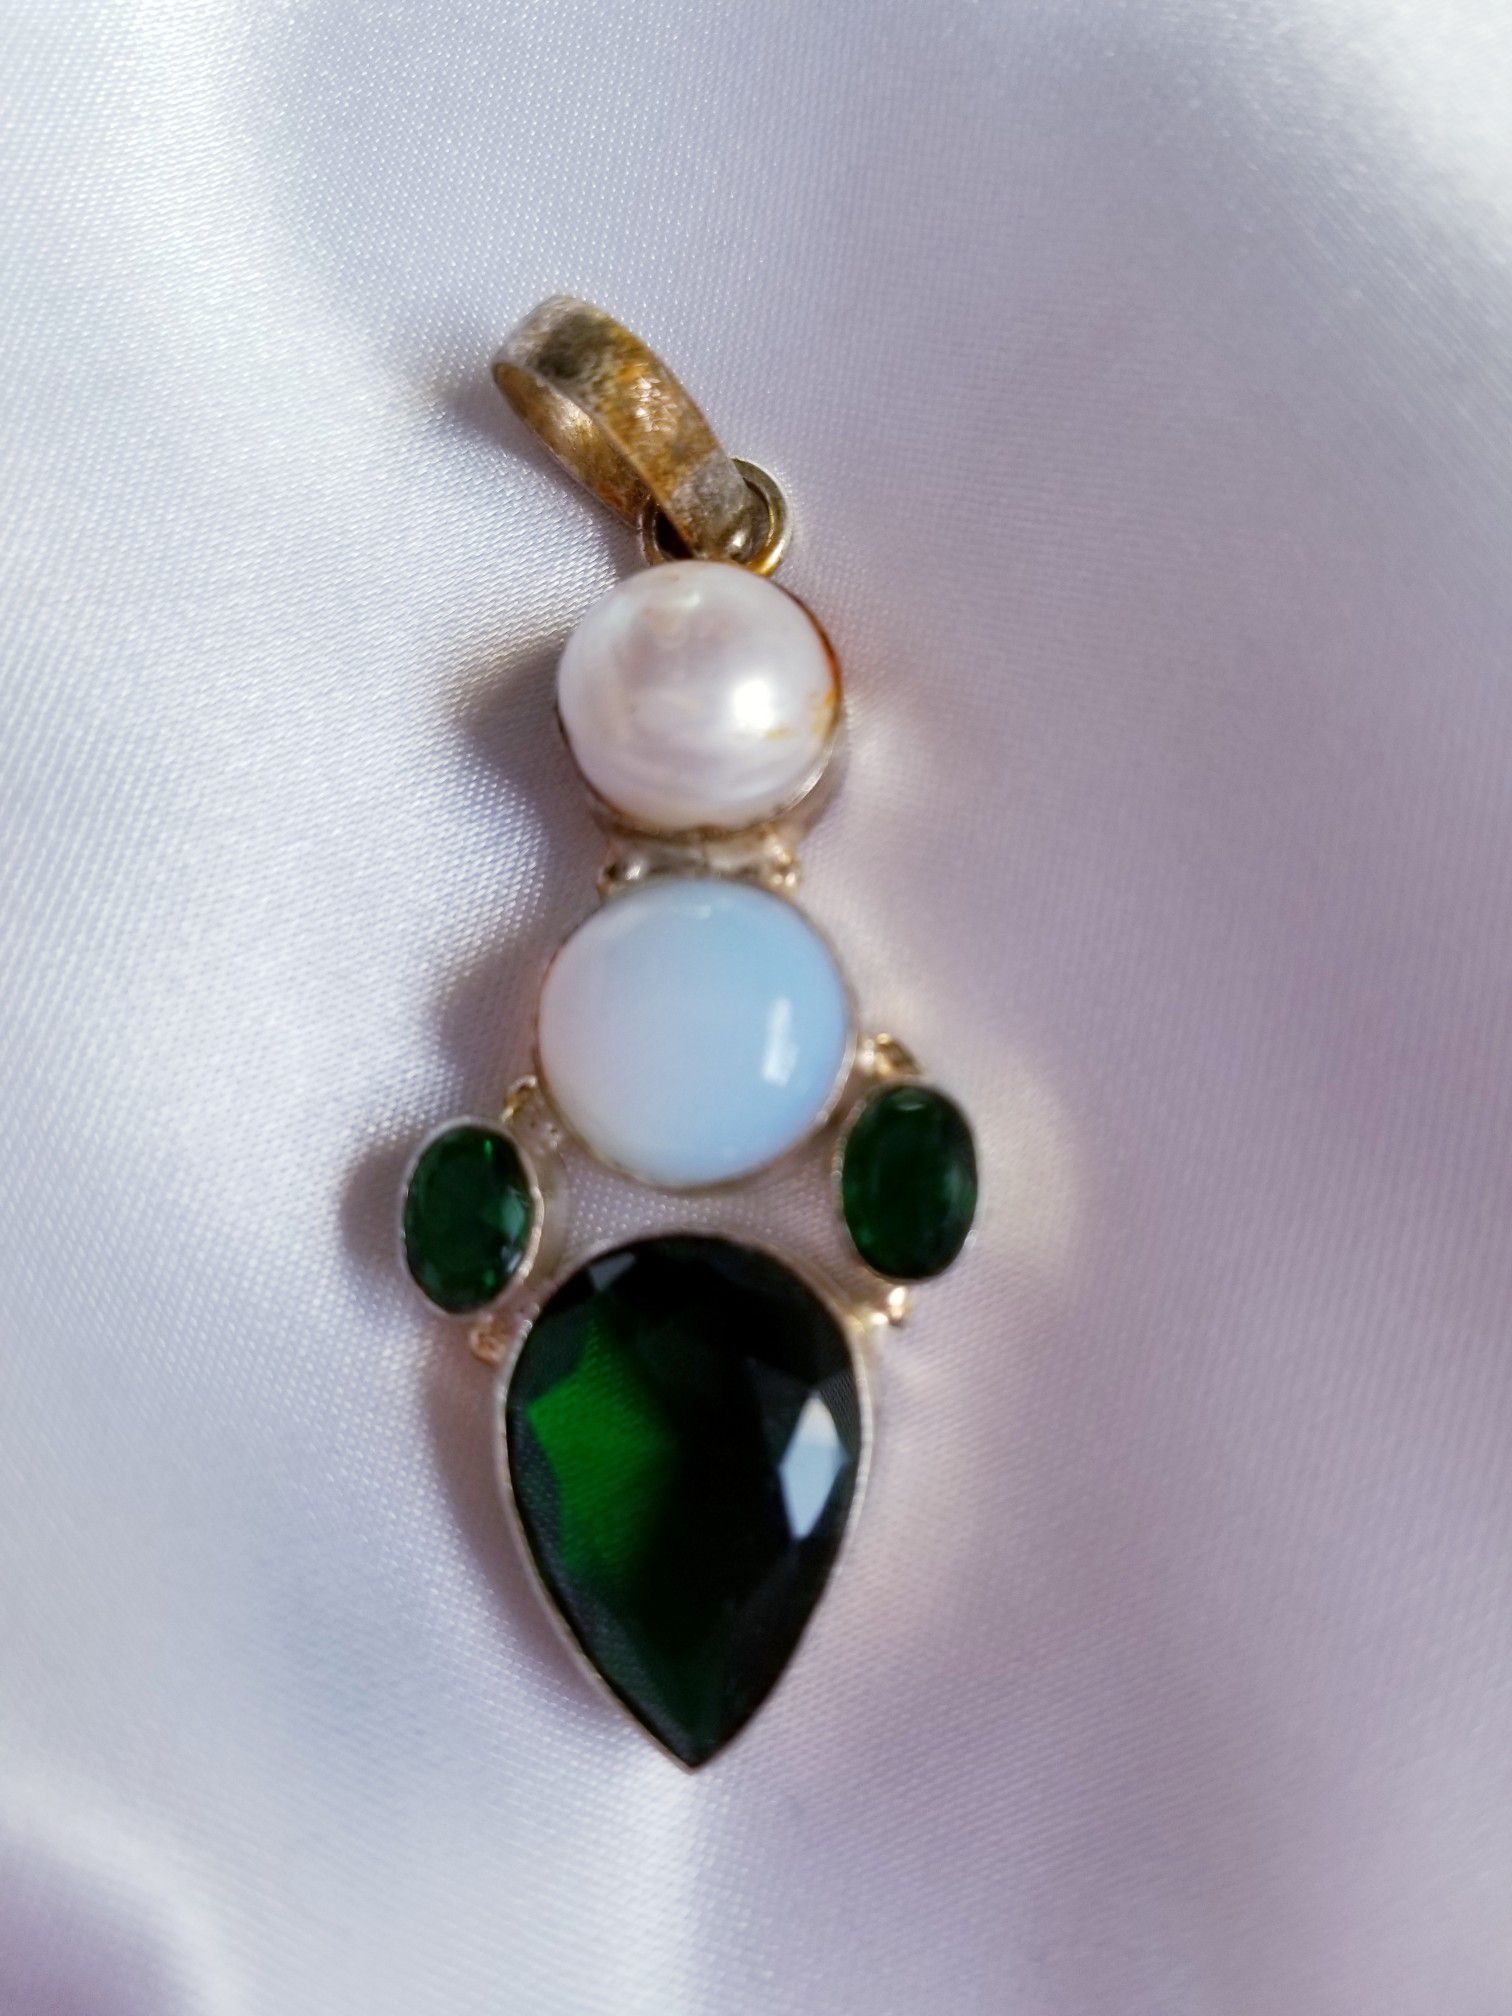 Emerald (lab), opal and pearl in sterling silver pendant, 2 1/4" long